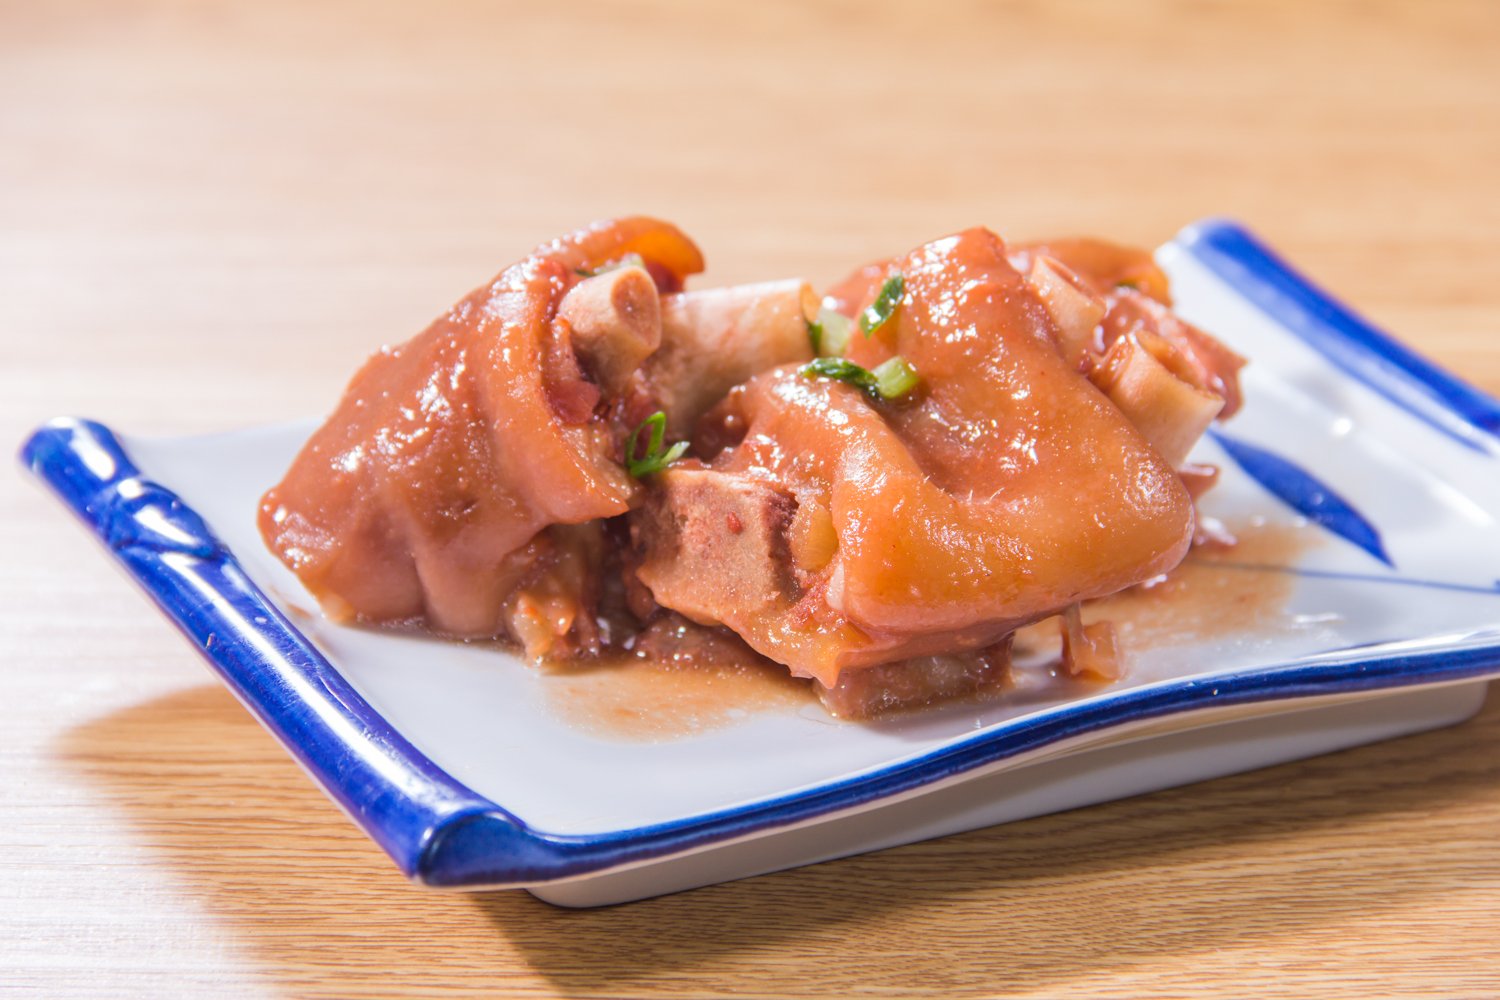 Braised Pork Knuckle with Red Fermented Bean Curd